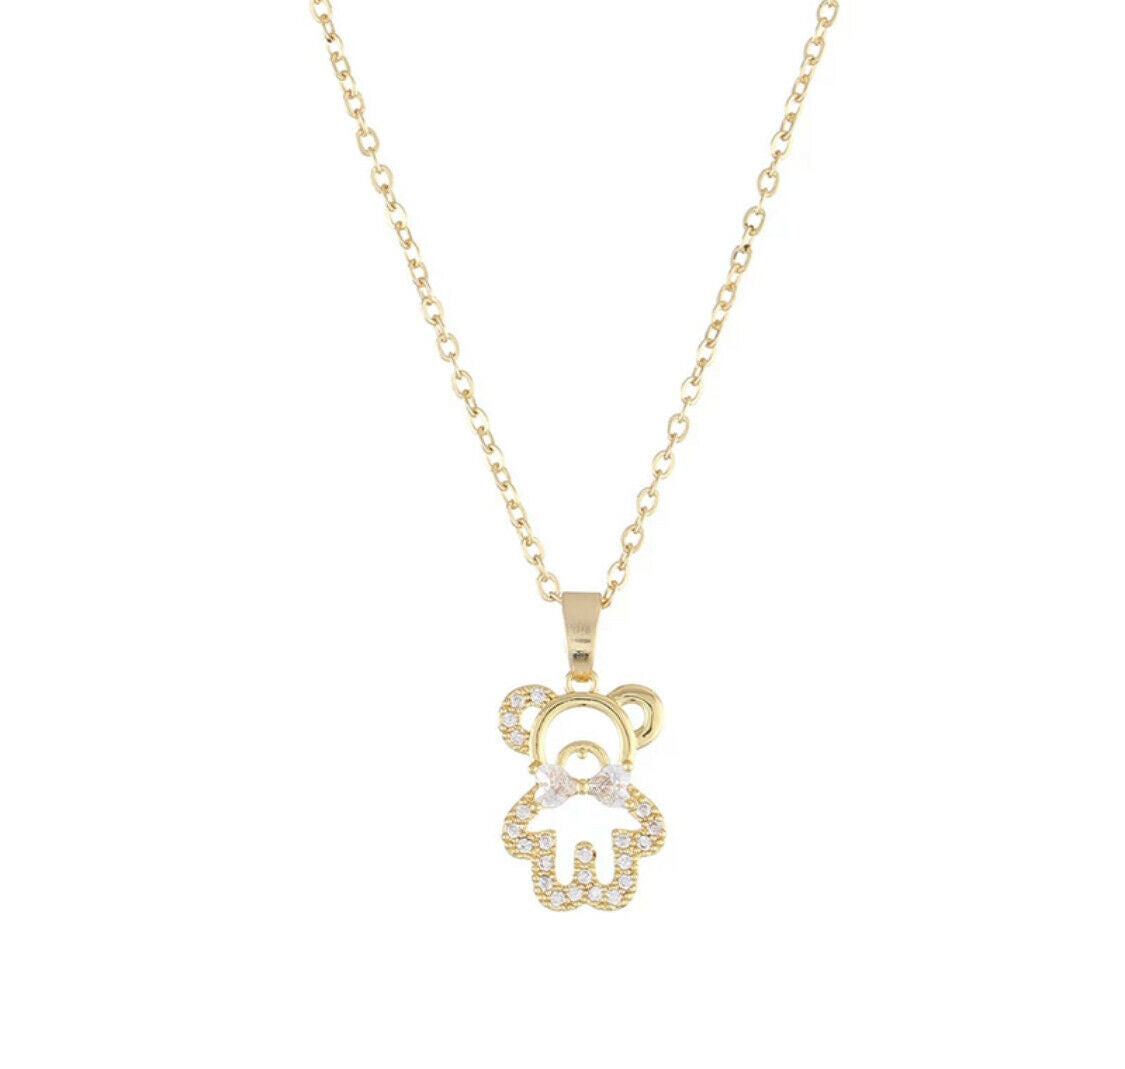 14k Gold Plated Necklace Teddy Bear Pendant Cubic Zirconia Kpop Chain Unbranded